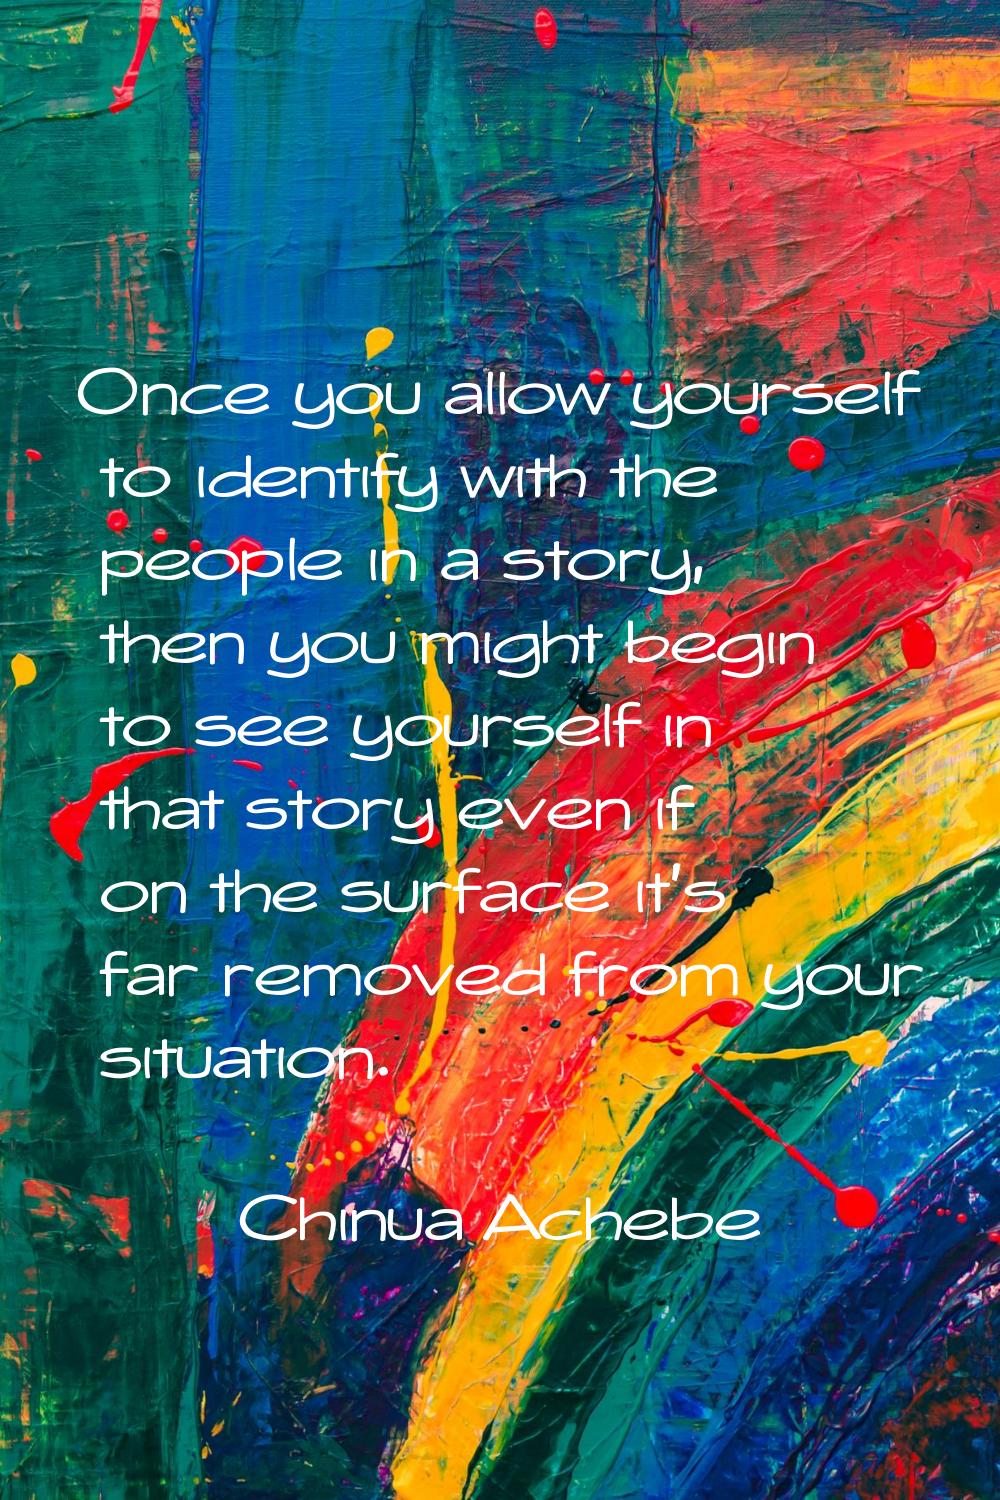 Once you allow yourself to identify with the people in a story, then you might begin to see yoursel